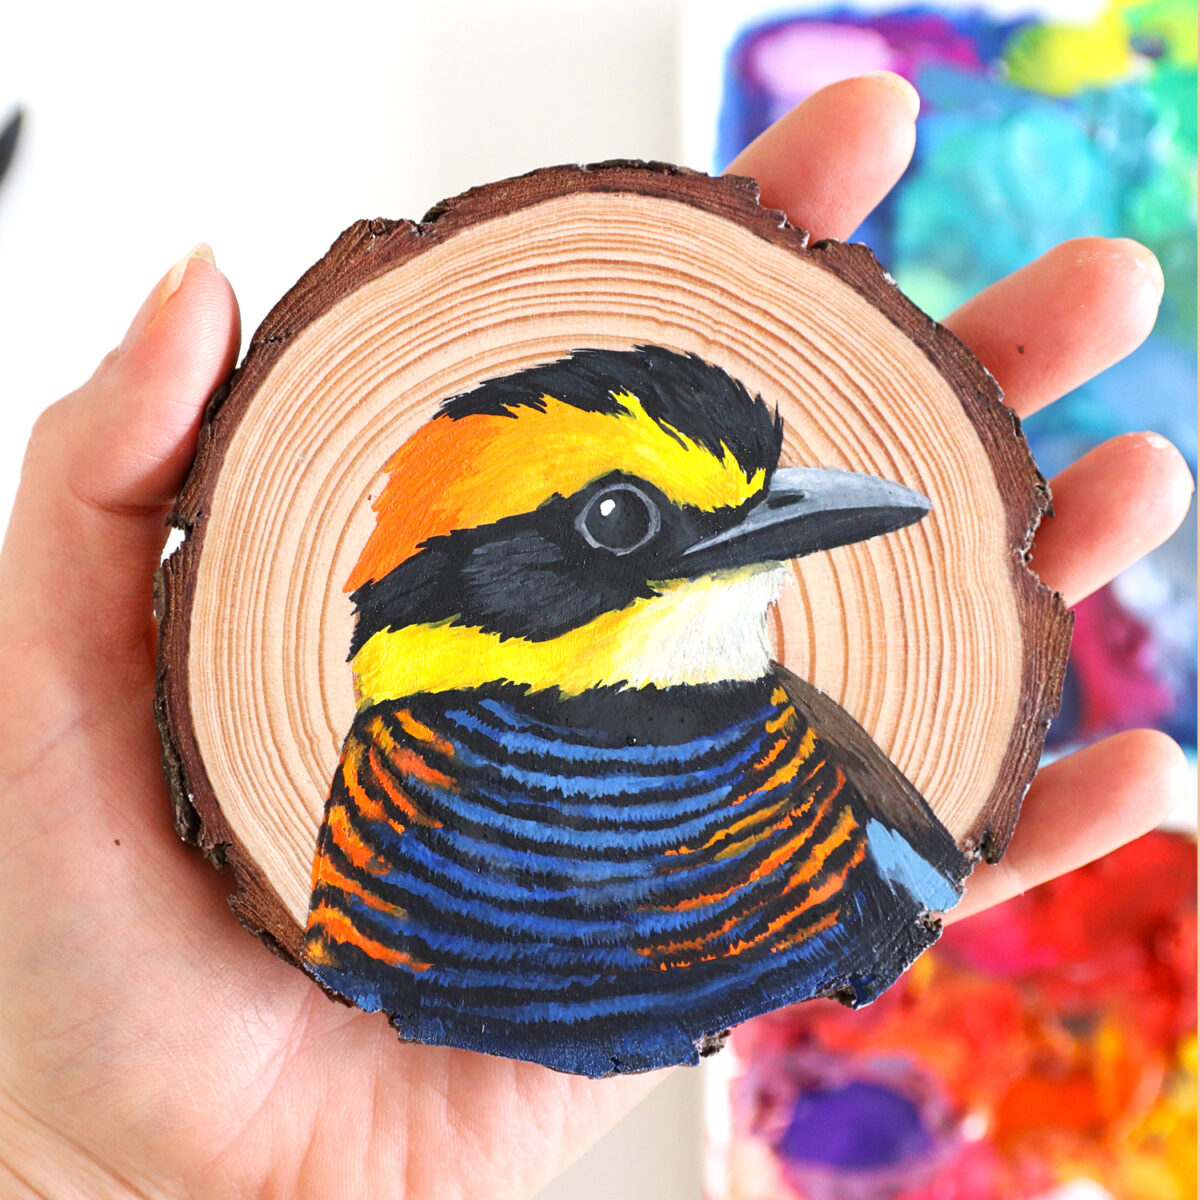 100 Days Of Birds A Marvelous Series Of Gouache On Wood Paintings By Deanna Maree (27)